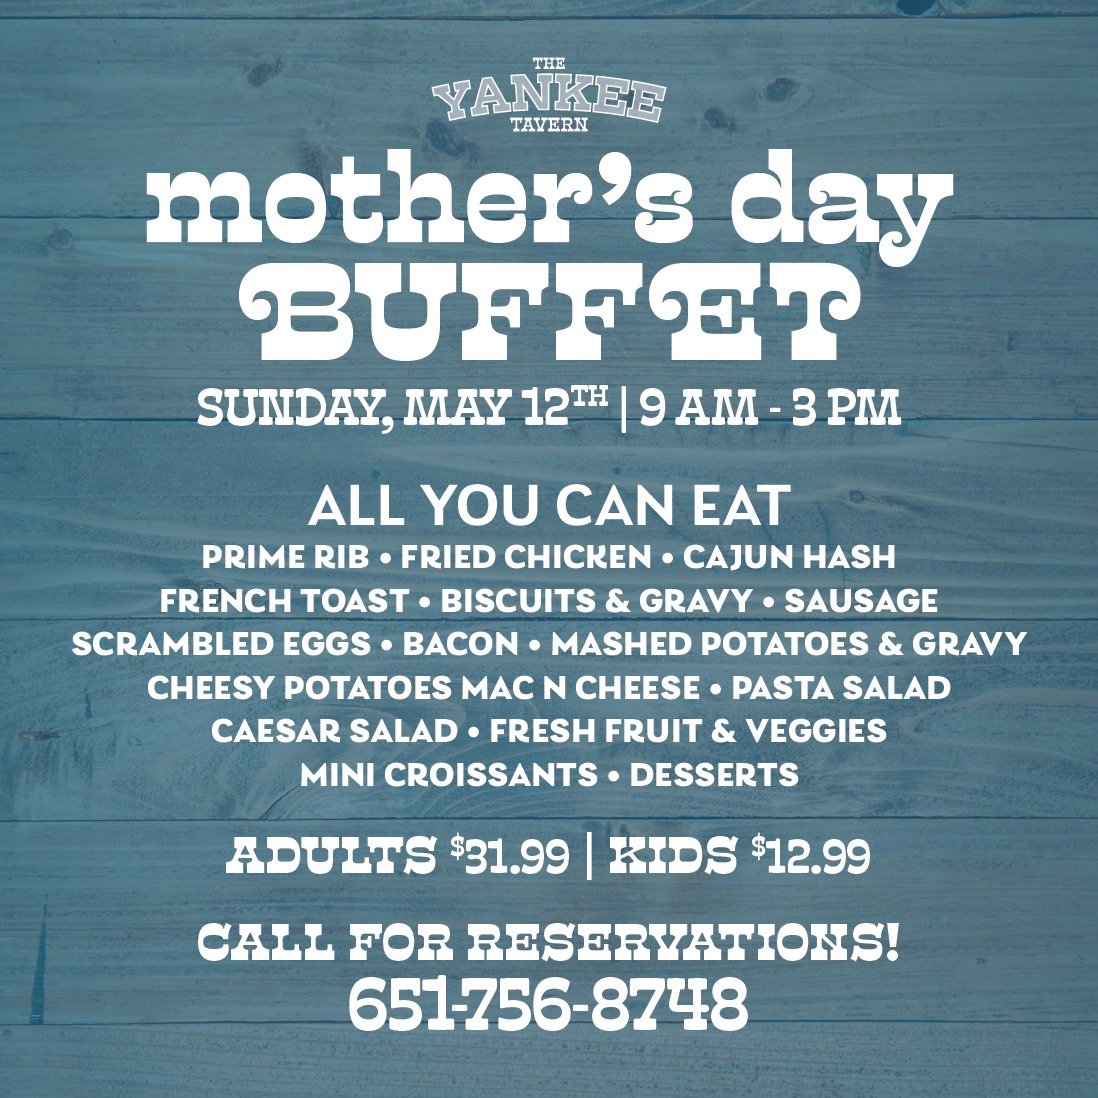 There's still time to make your reservation for our Mother's Day buffet on Sunday, May 12! Treat mom to all-you-can-eat prime rib, fried chicken, cheesy potatoes, salads, desserts &amp; more 🌷 Give us a call at 651-756-8748 to reserve your table.